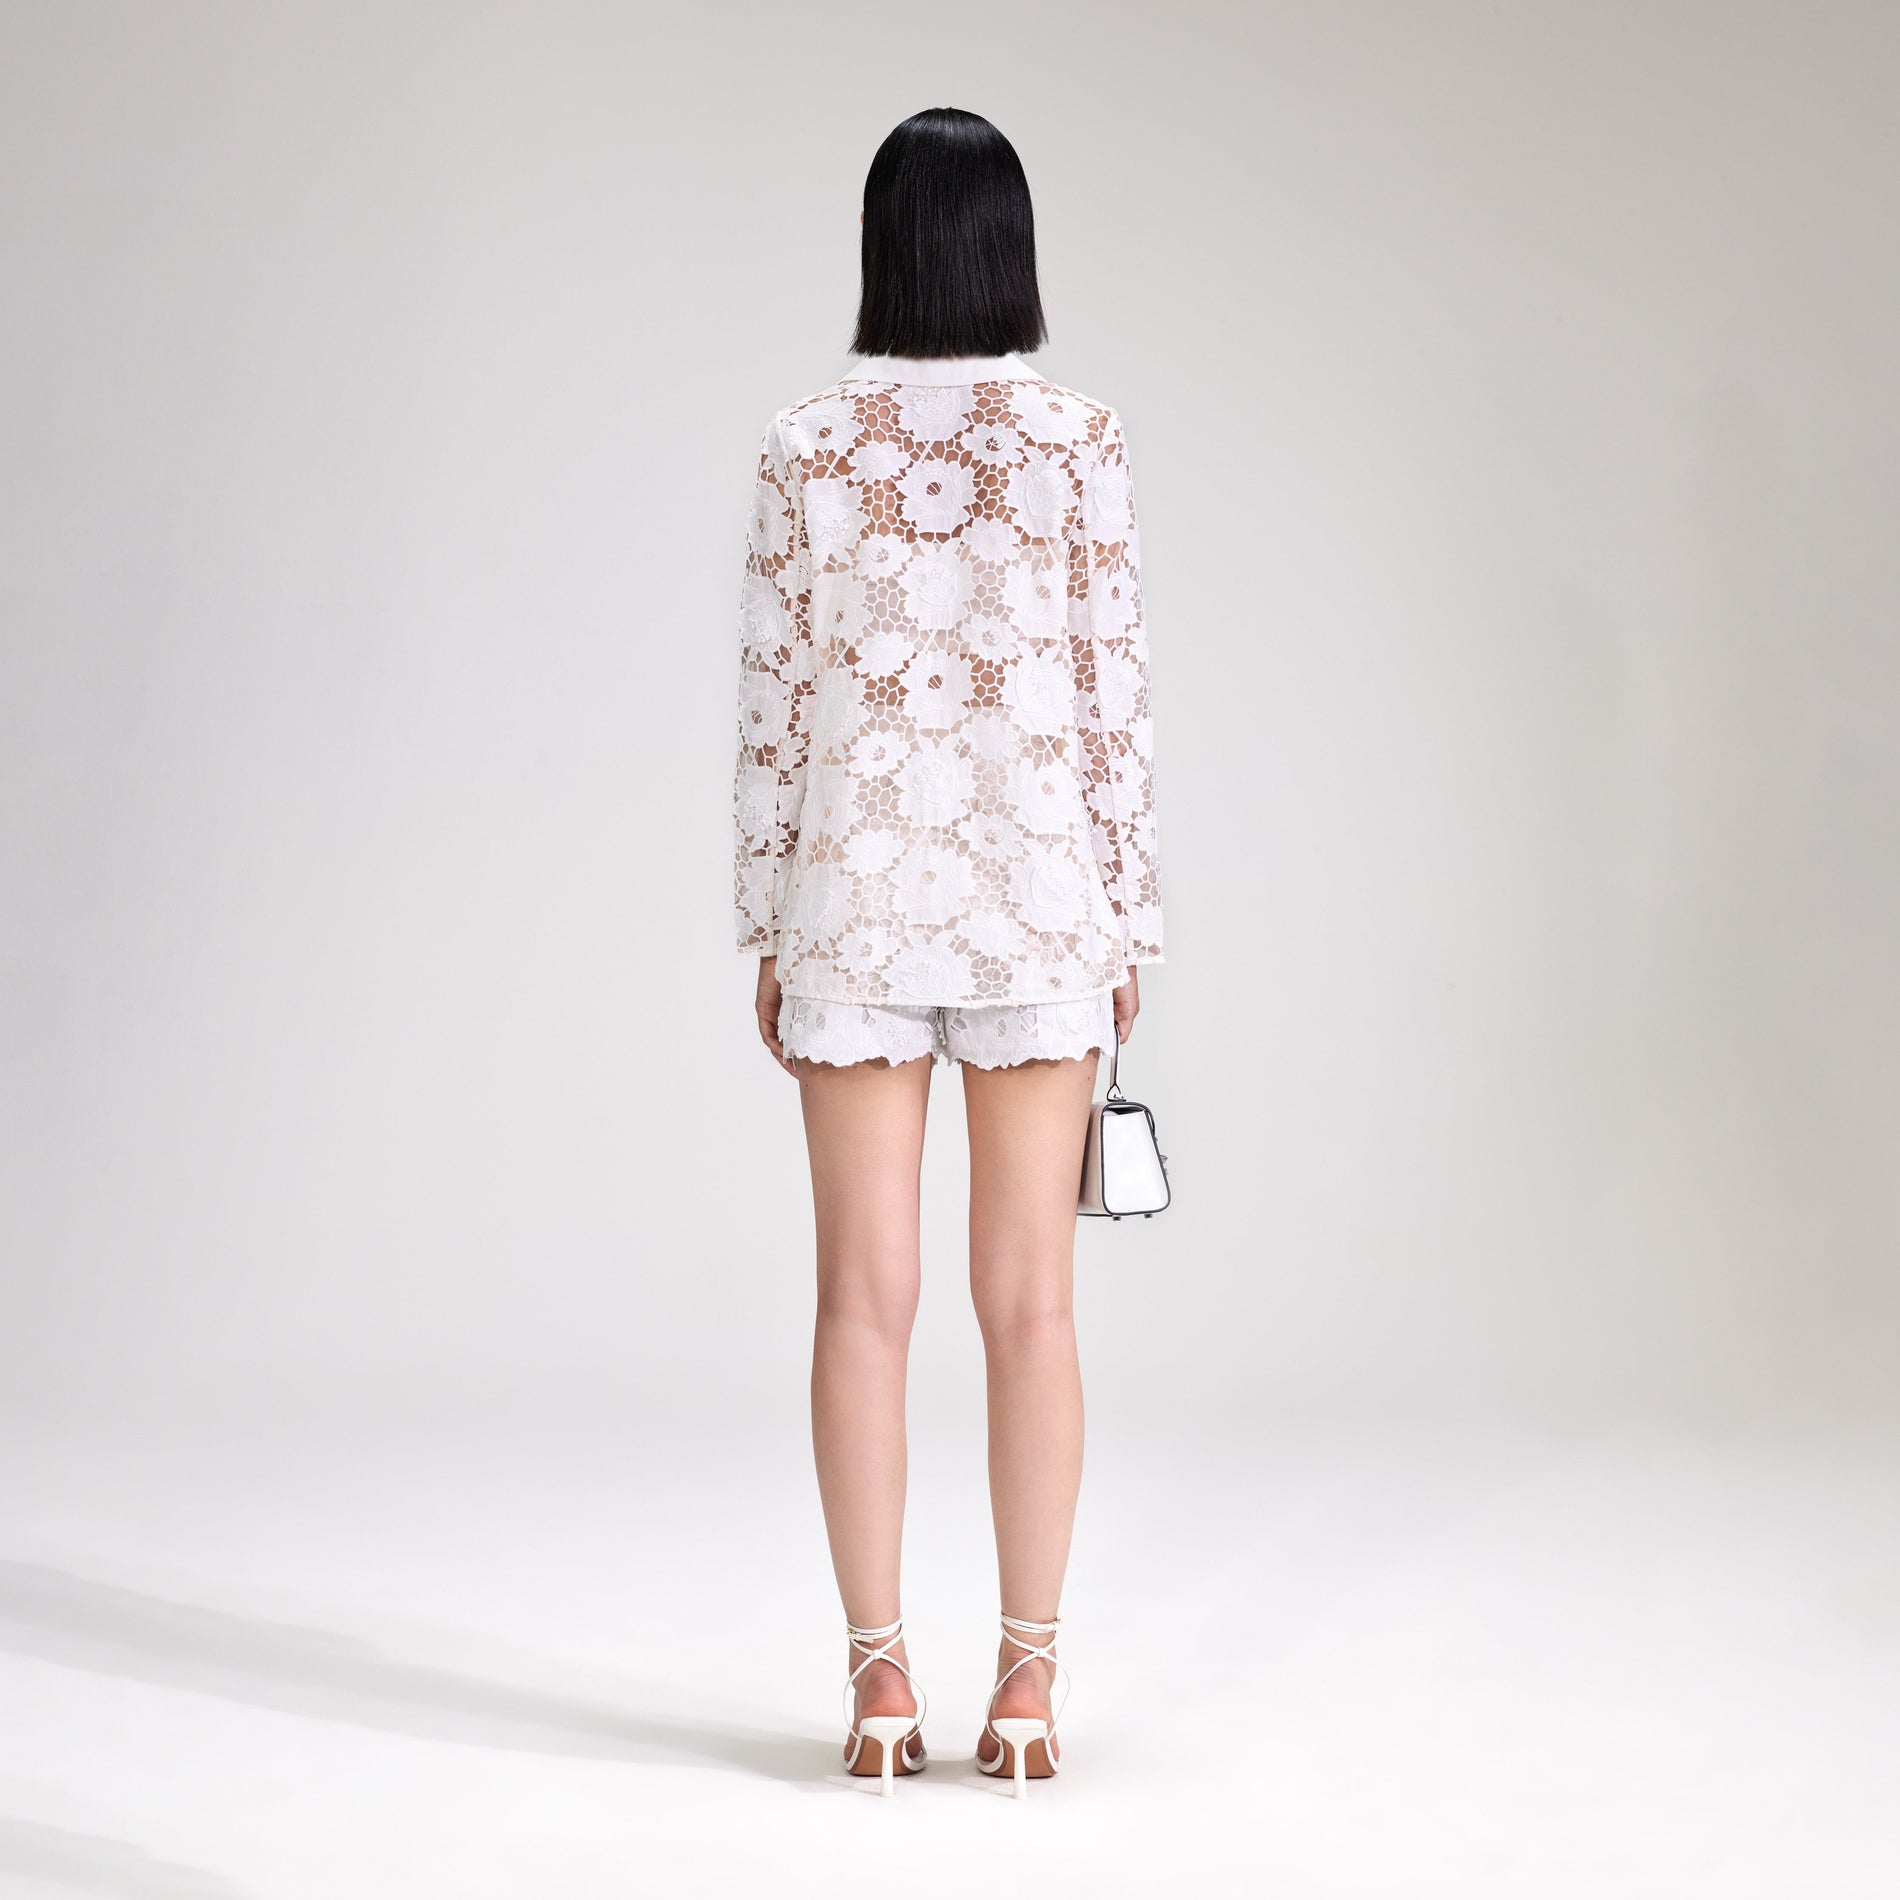 A woman wearing the White 3D Cotton Lace Shorts